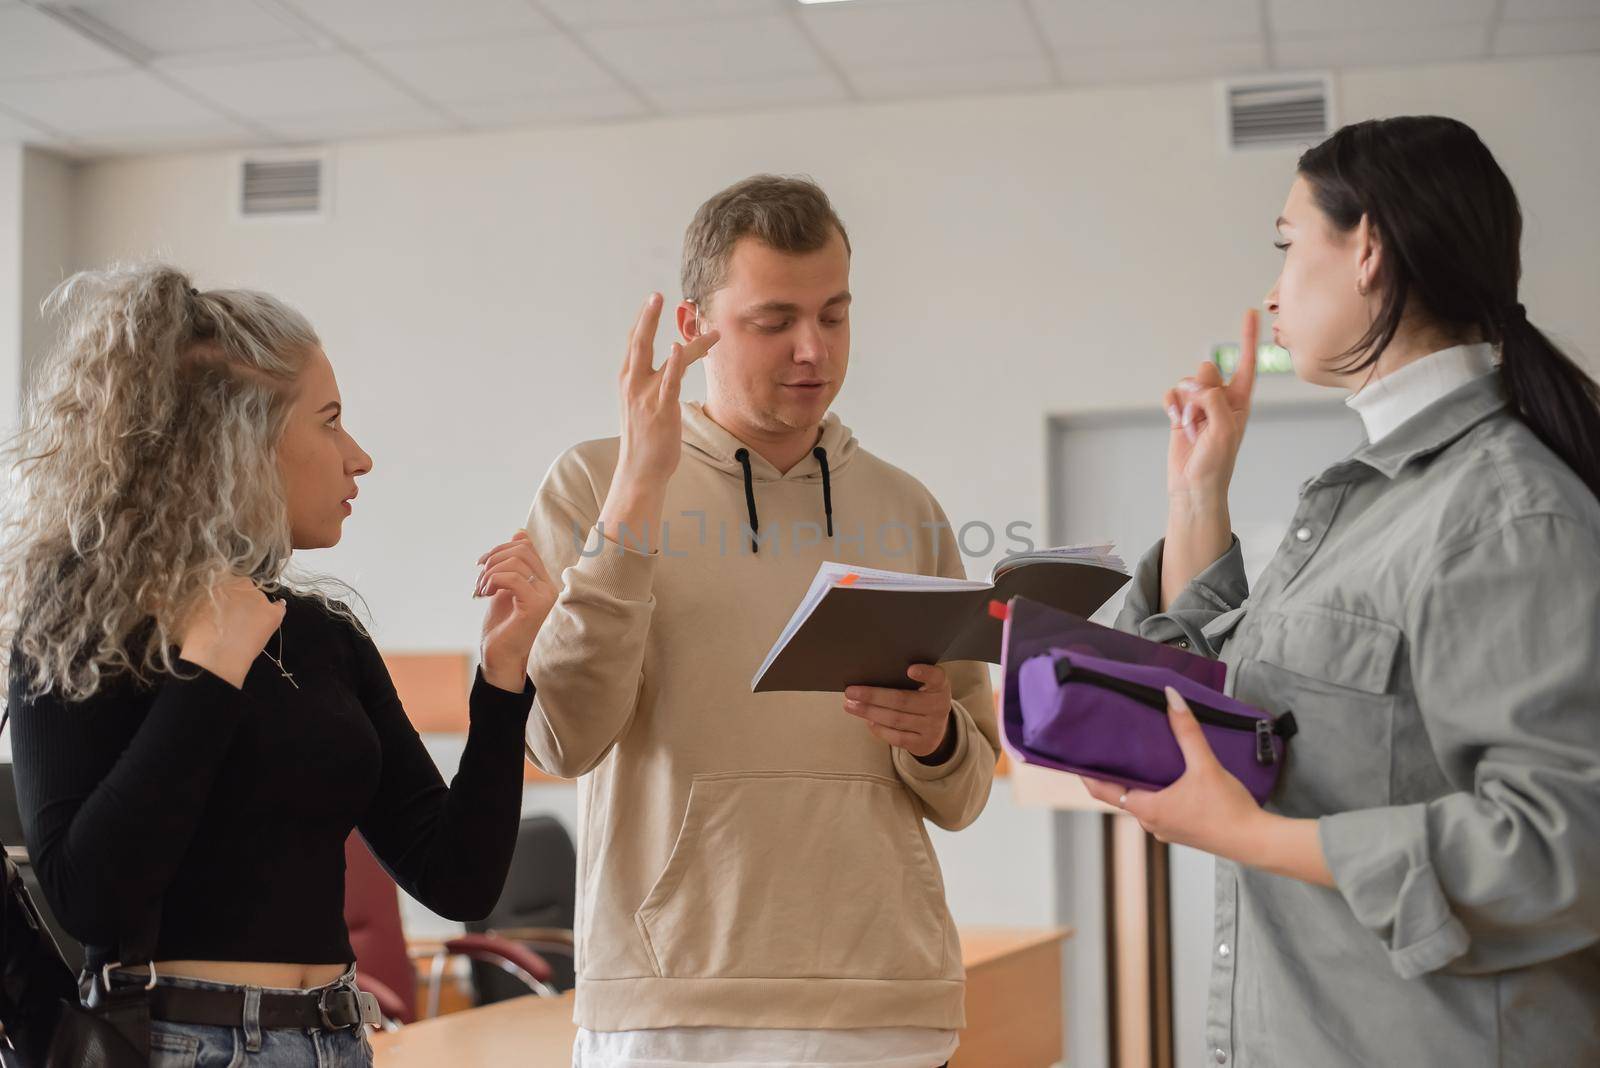 Two girls and a guy are talking in sign language. Three deaf students chatting in a university classroom